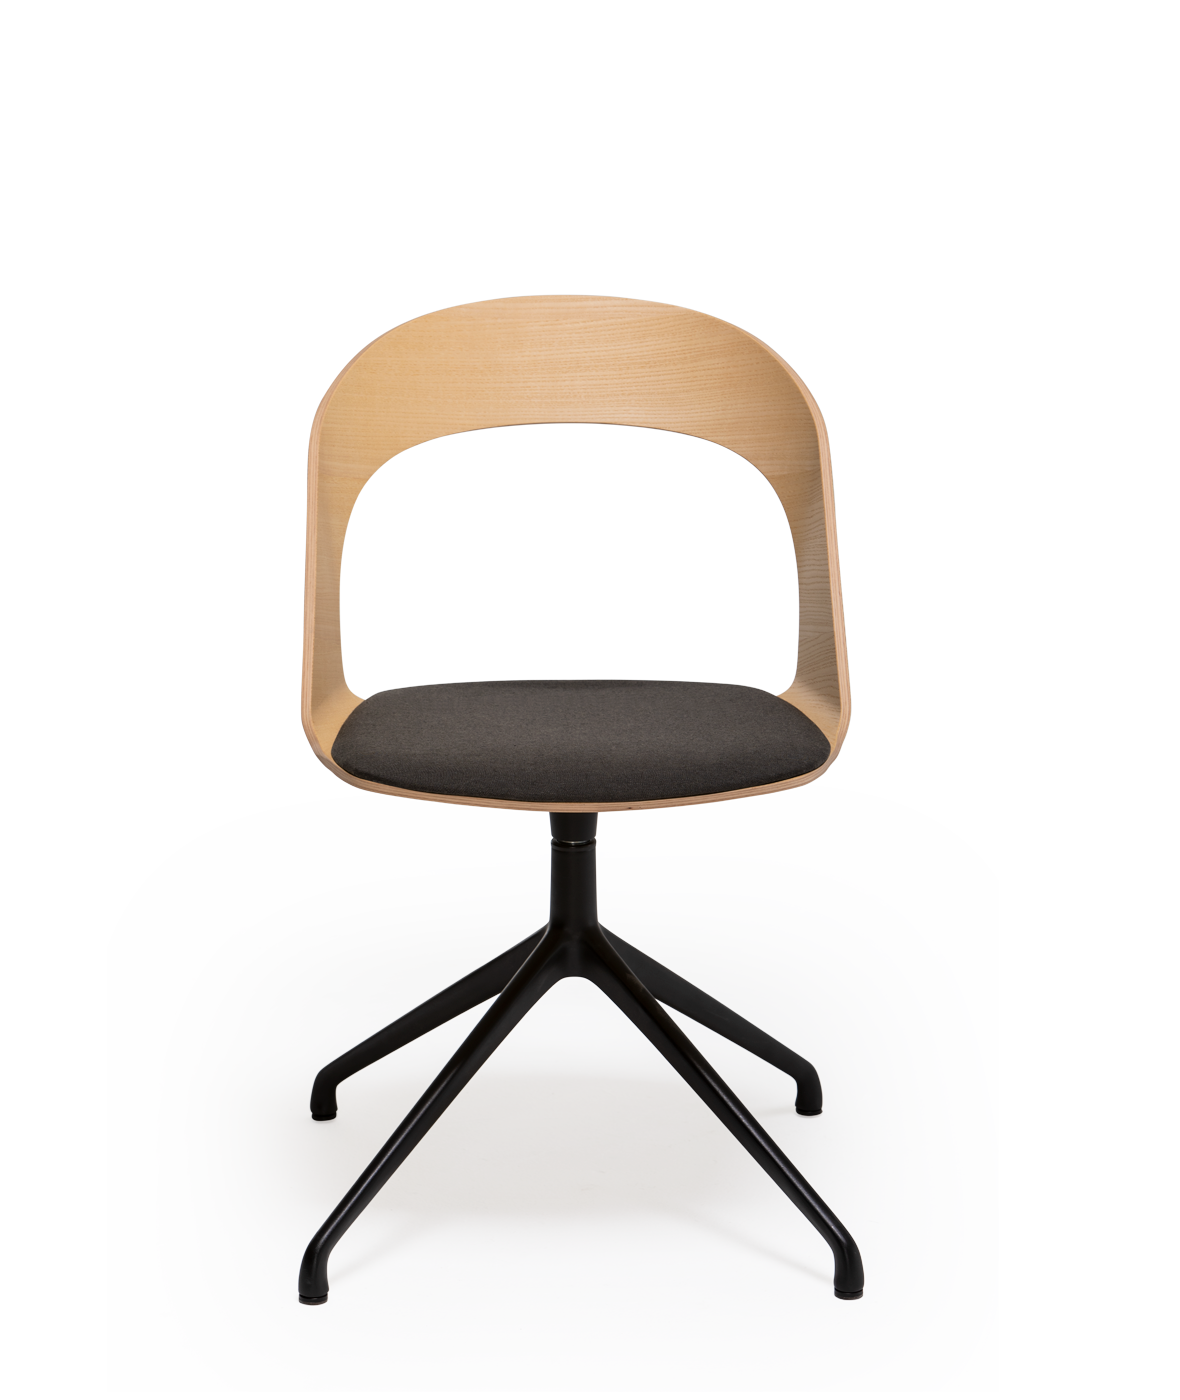 Goose chair Model D with 4 rollers swivel base - Vergés